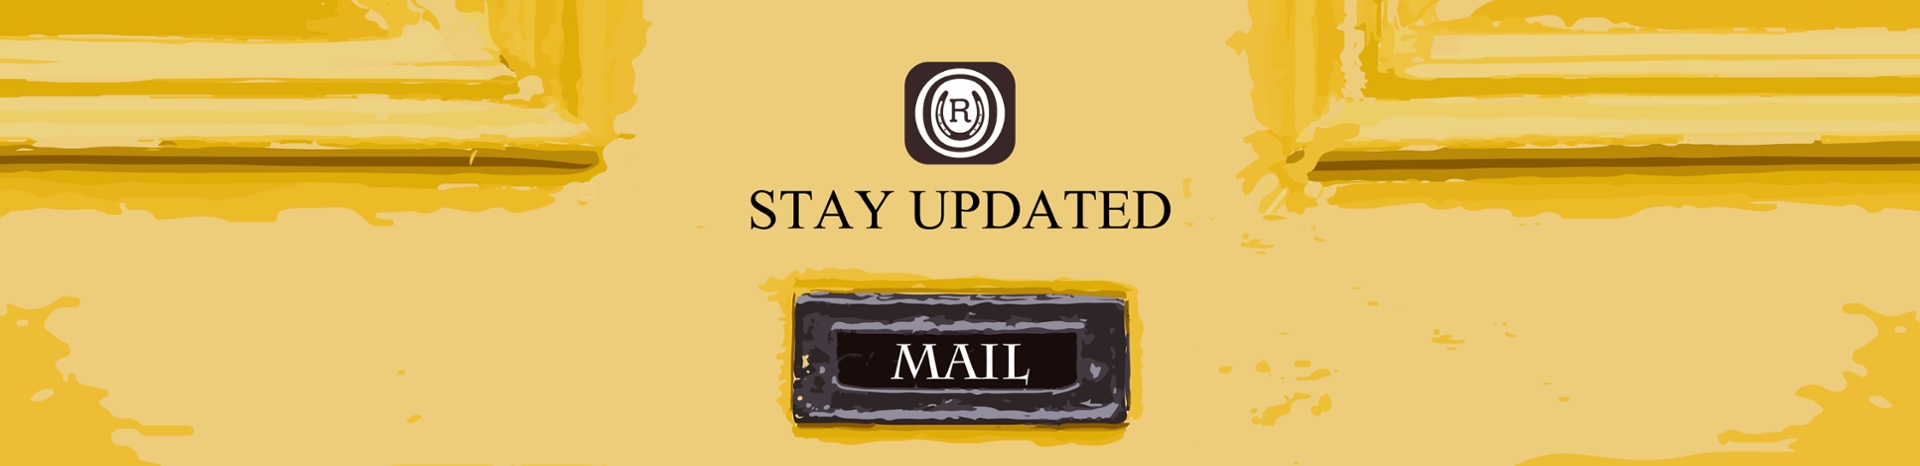 Rustic background with the OUR Icon (horseshoe) and the following text under it: Stay updated and Mail